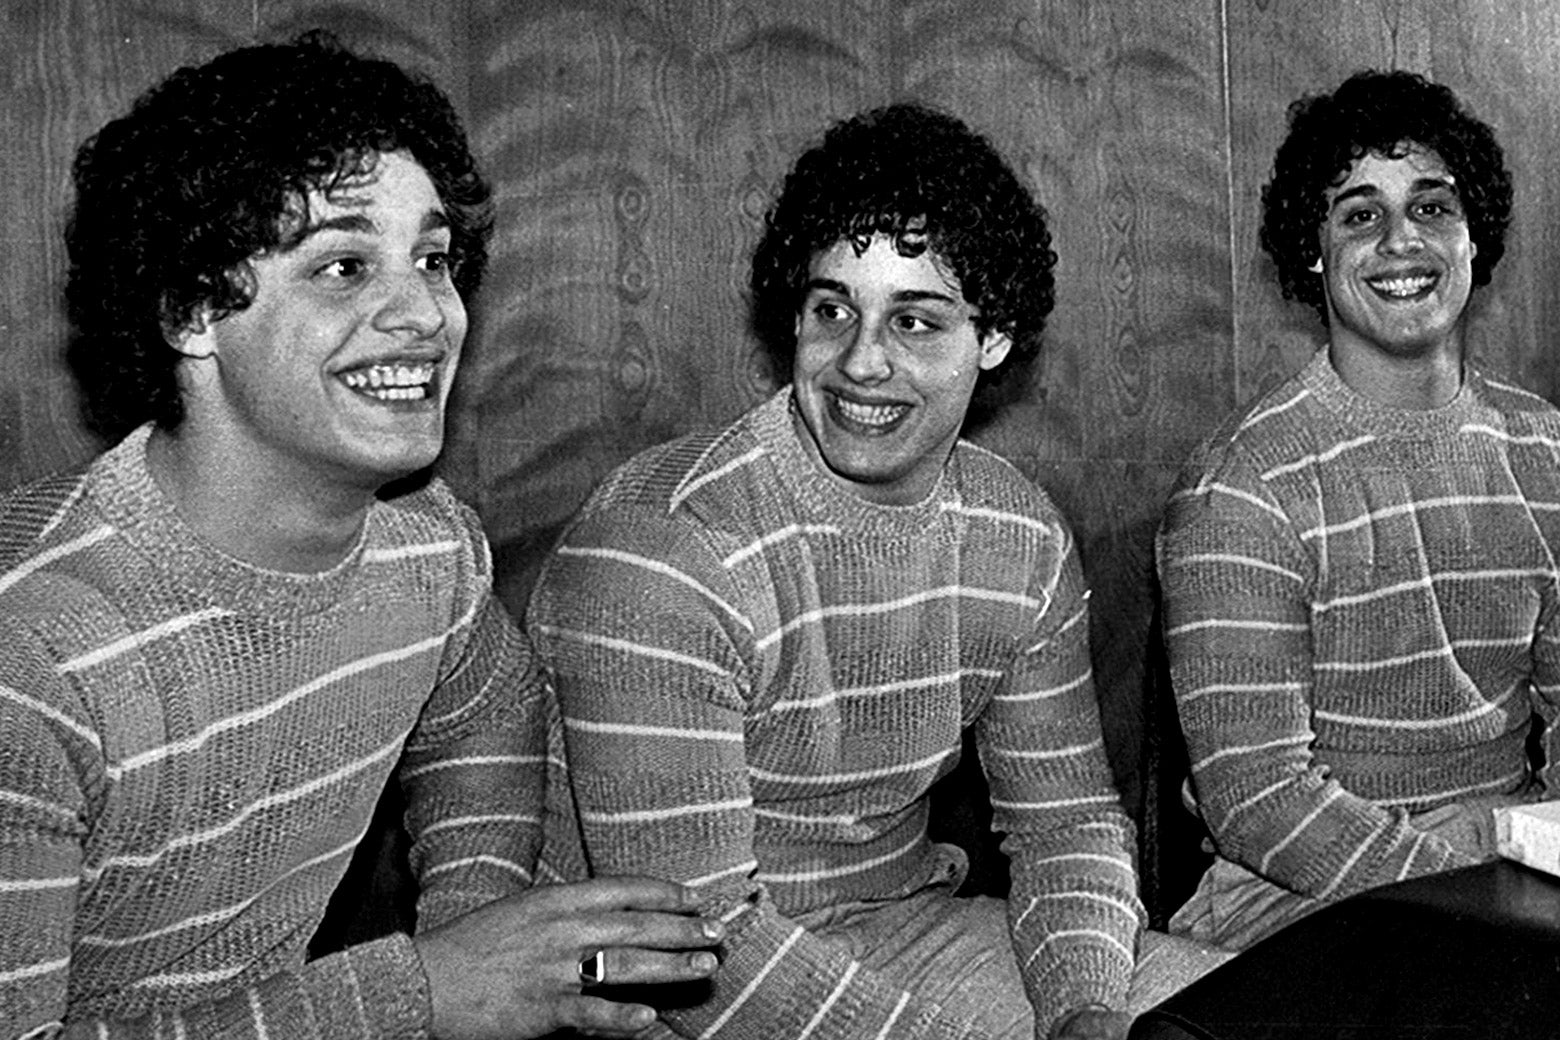 Bobby Shafran, Eddy Galland, and David Kellman—triplets who were separated for science.